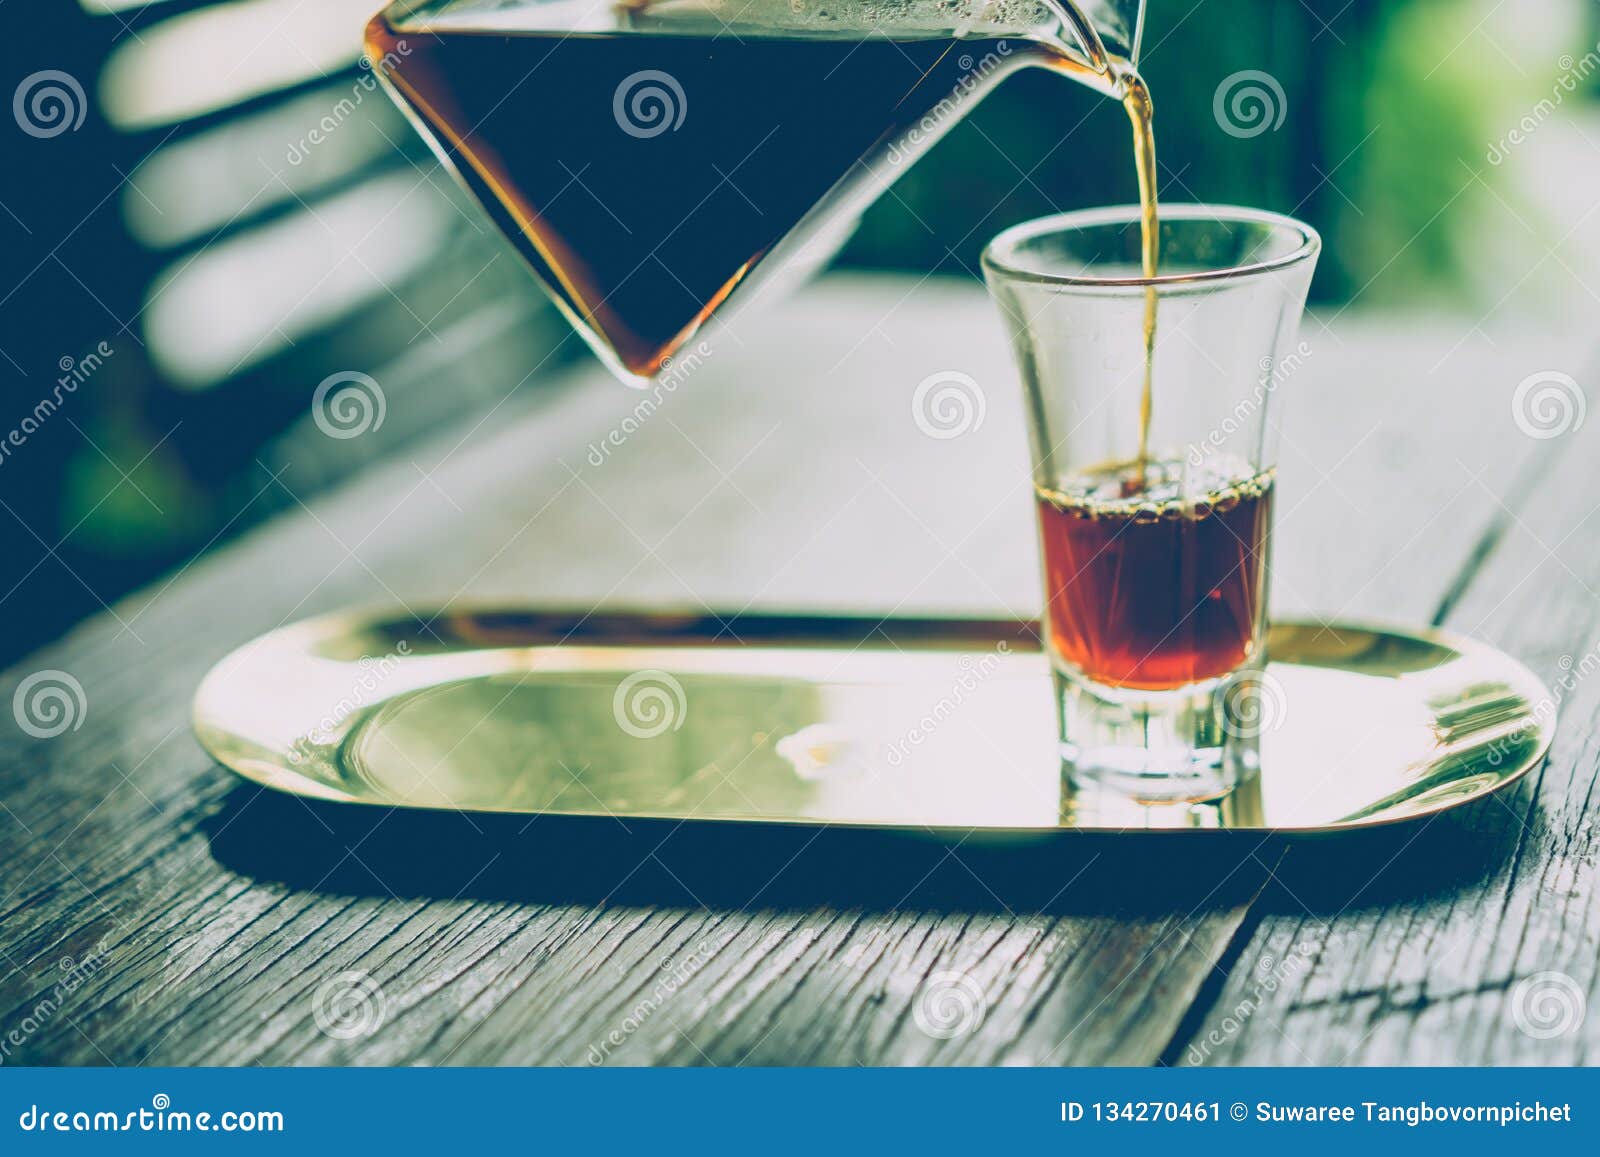 Black Coffee Or Americano On Table. Stock Image Image of